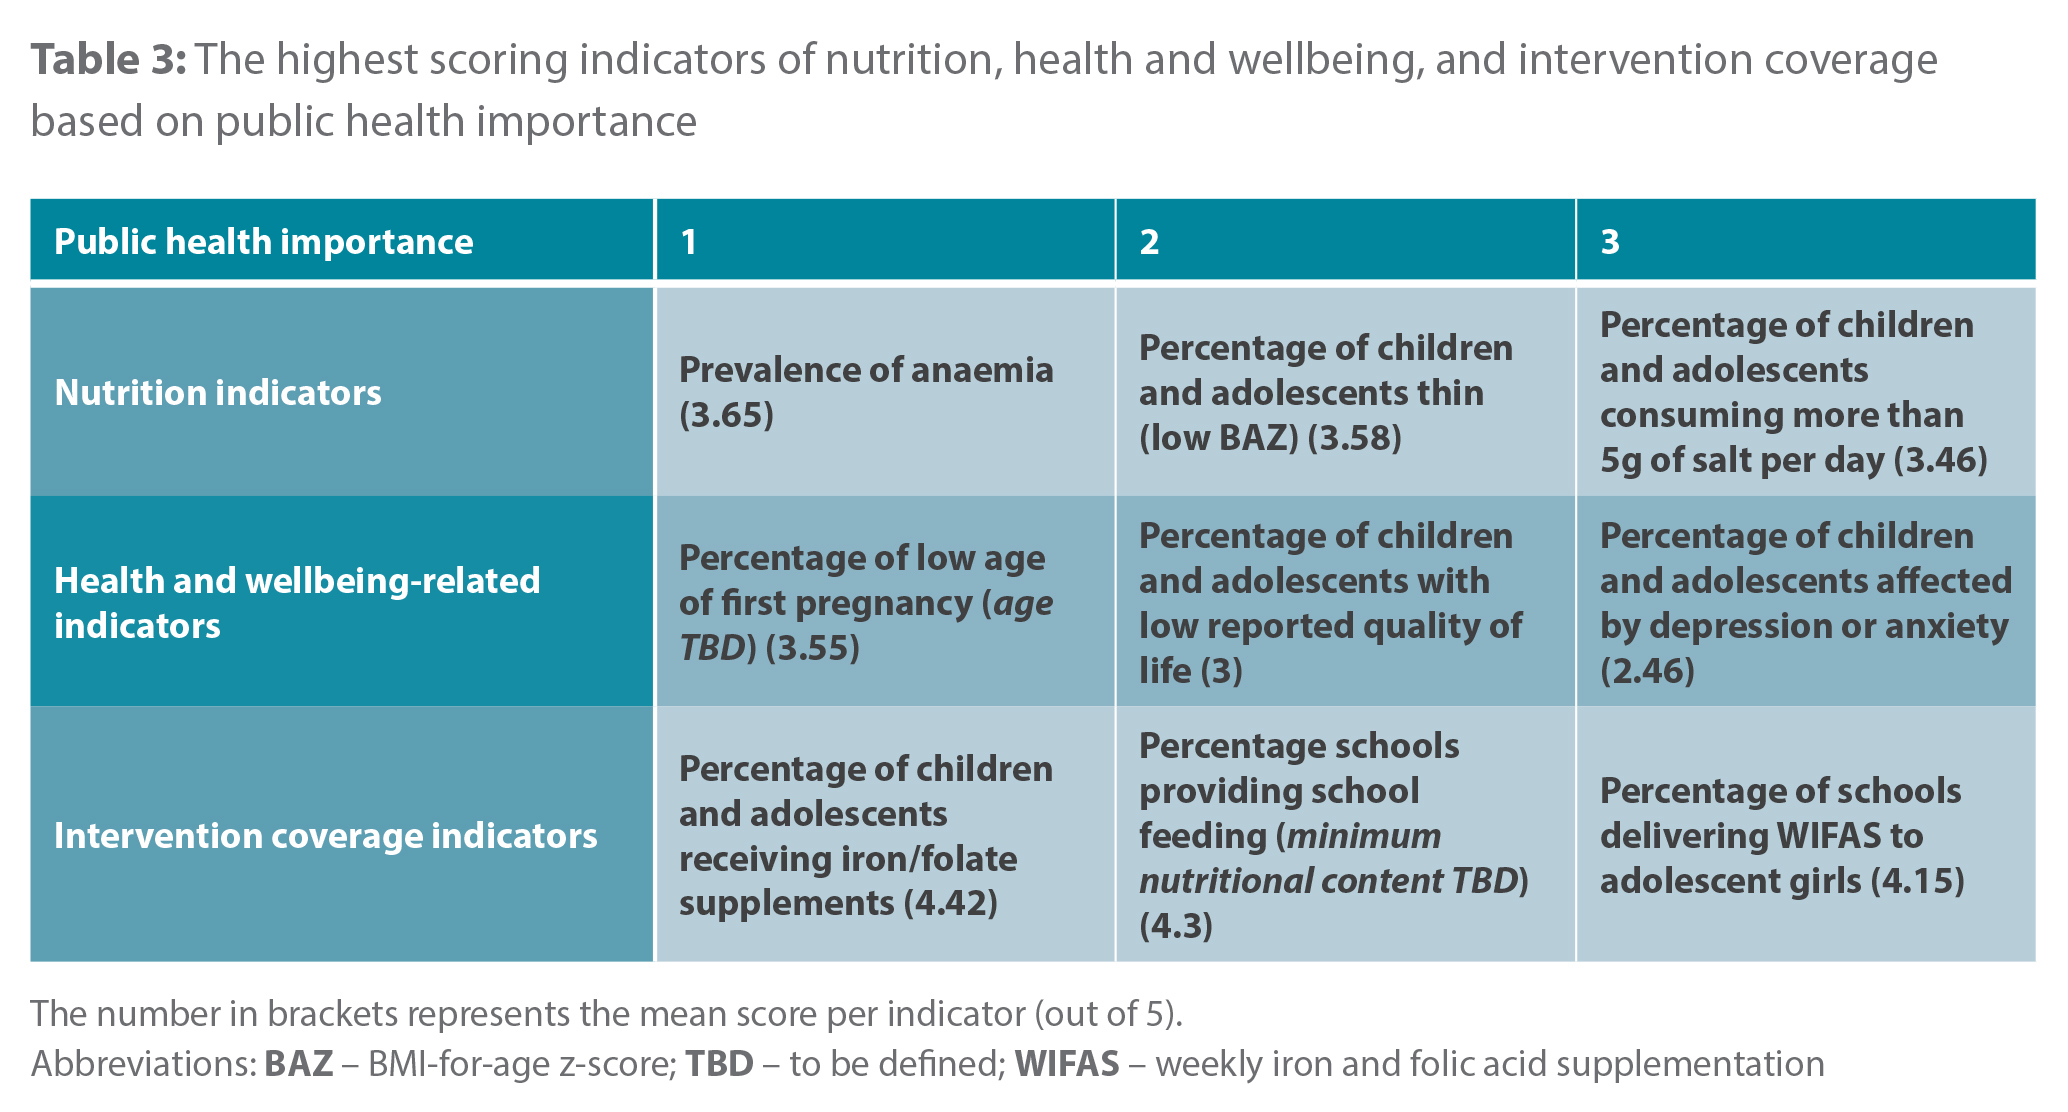 Table 3 showing the highest scoring indicators of nutrition, health and wellbeing, and intervention coverage based on public health importance